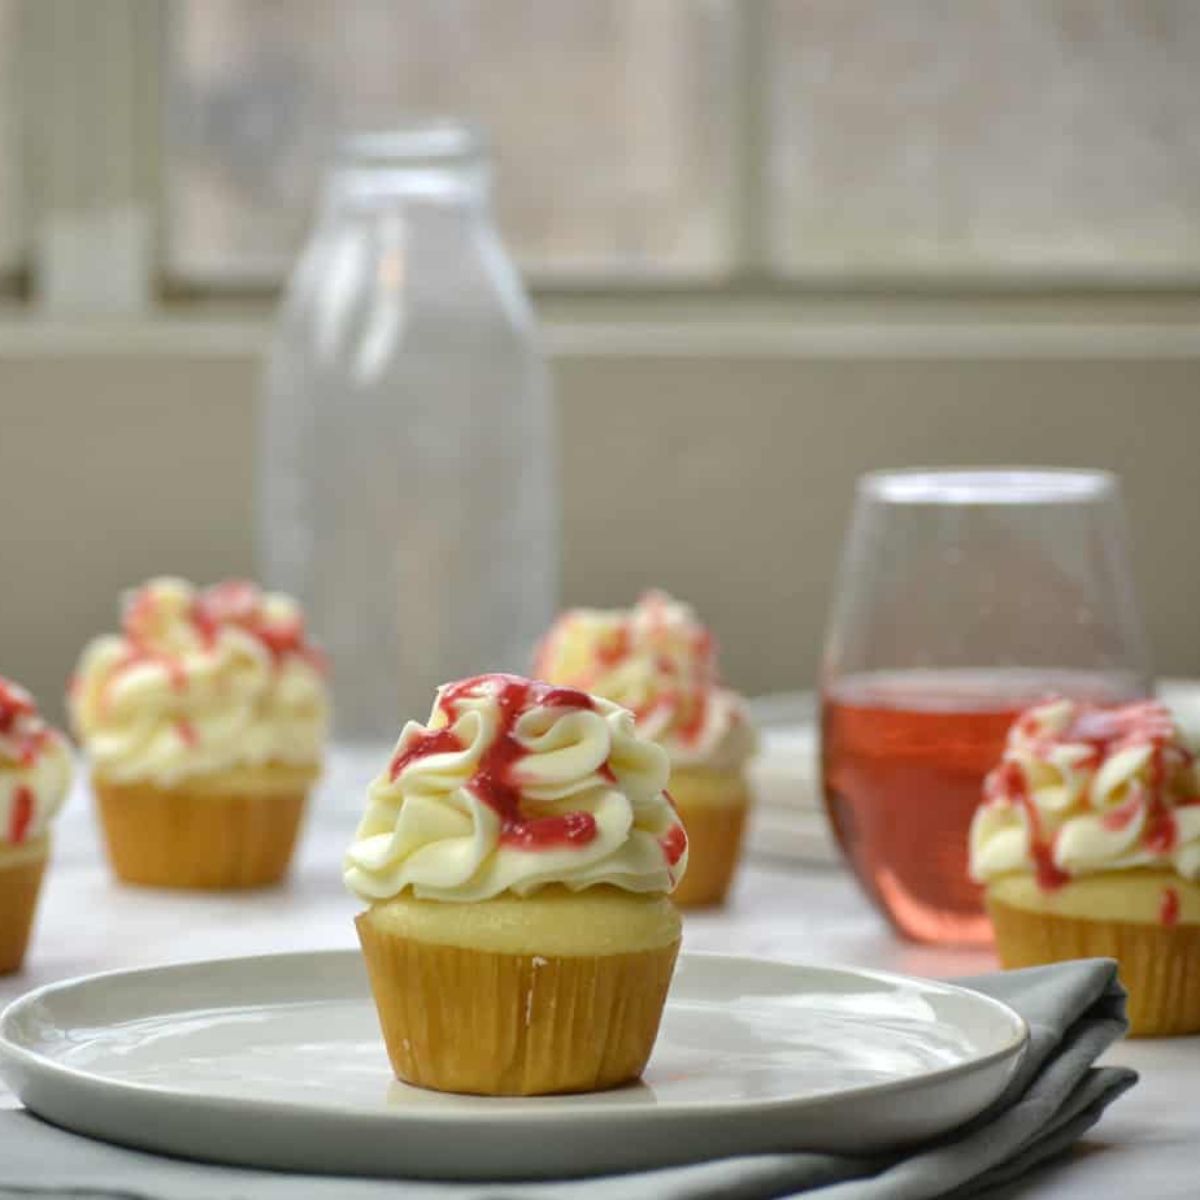 Pink Champagne Cupcakes With A Strawberry Compote Filling - The Art of Baking